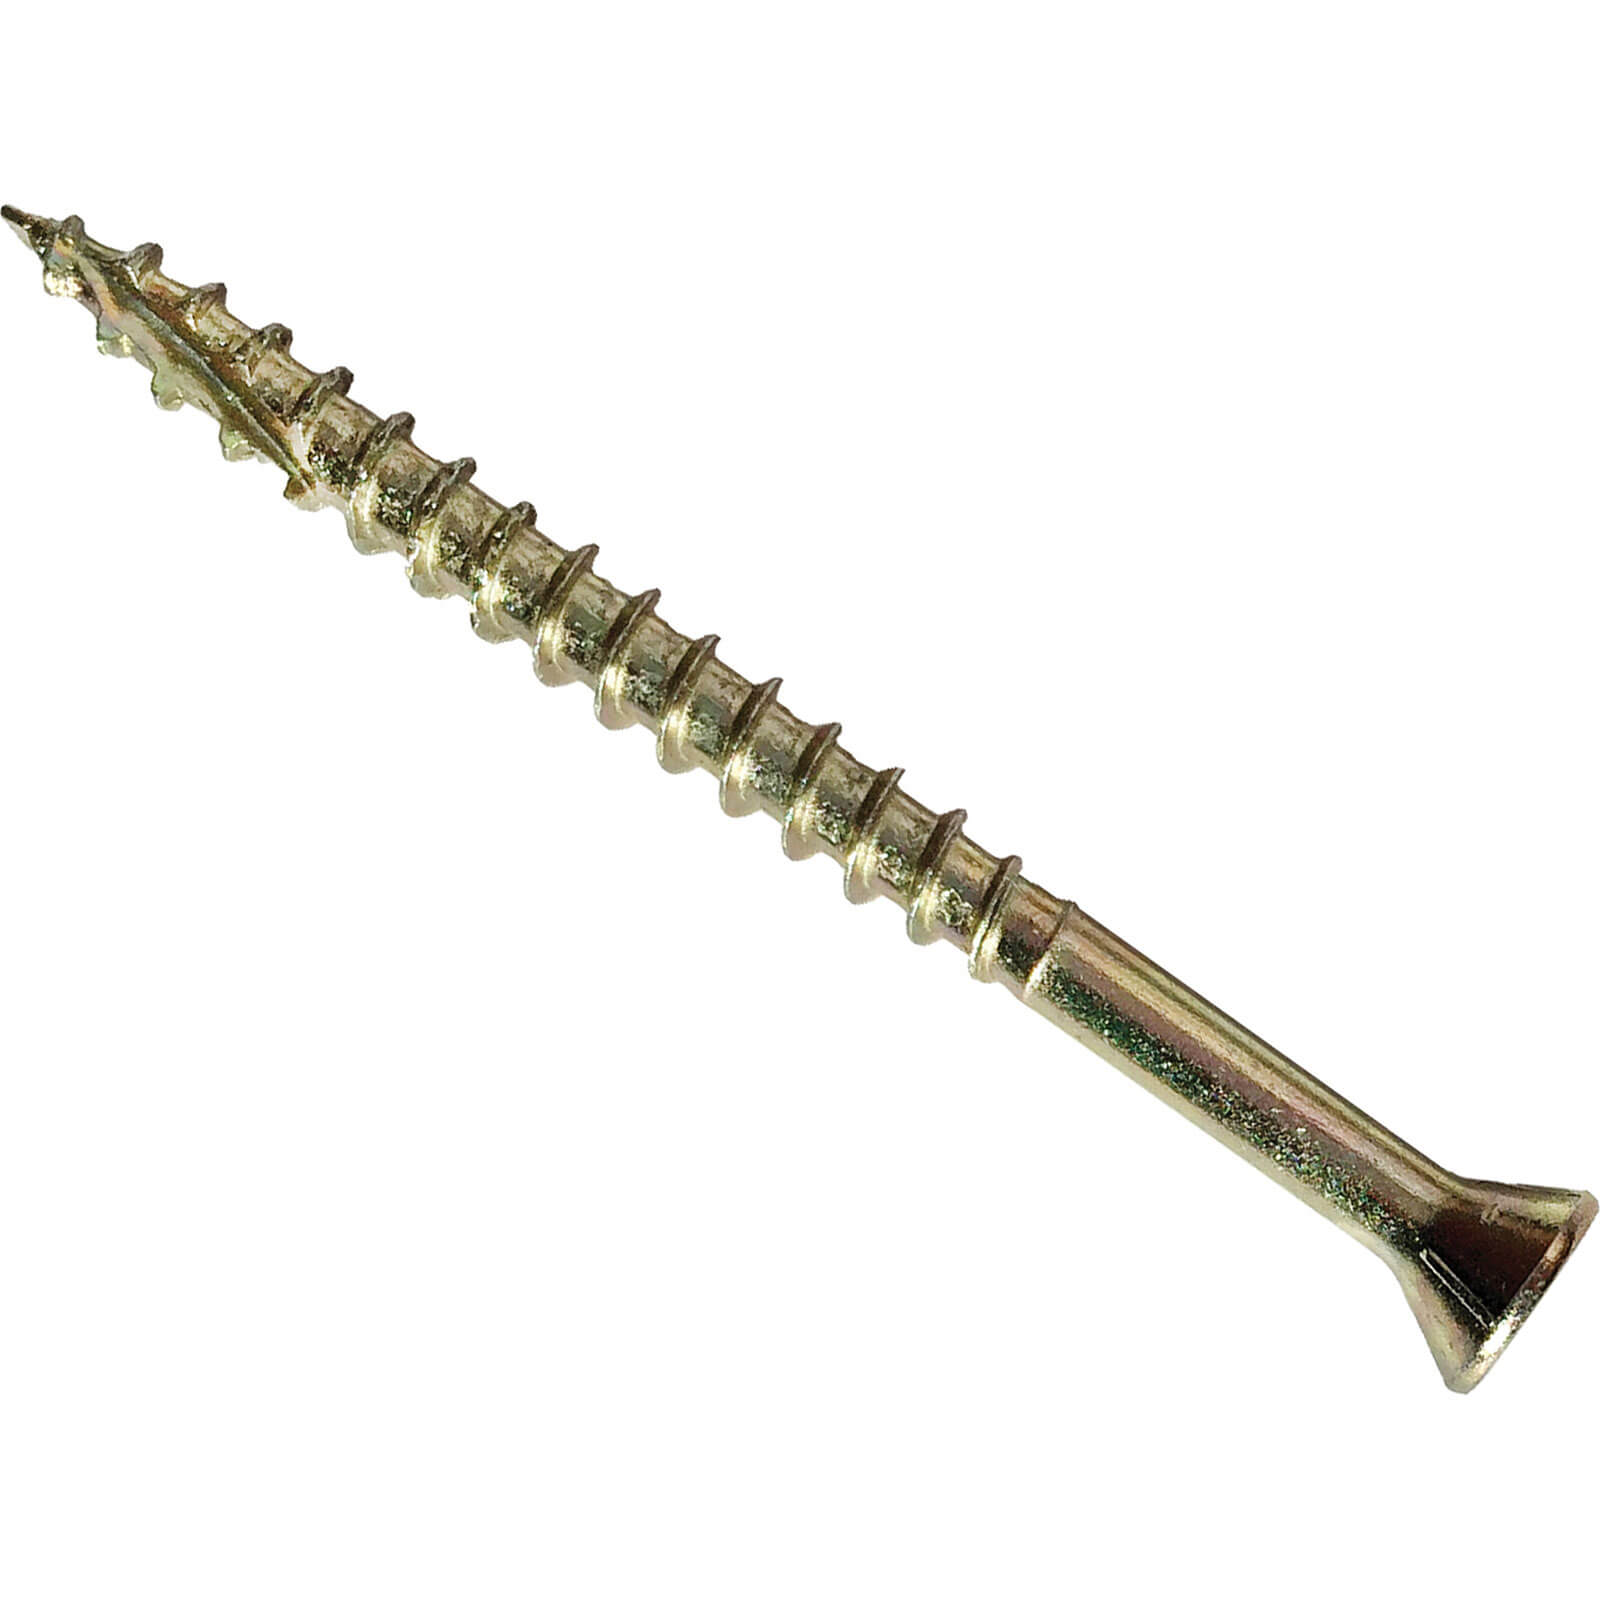 Image of Forgefix Forgefast Torx Tongue and Groove Flooring Screws 3.5mm 45mm Pack of 200